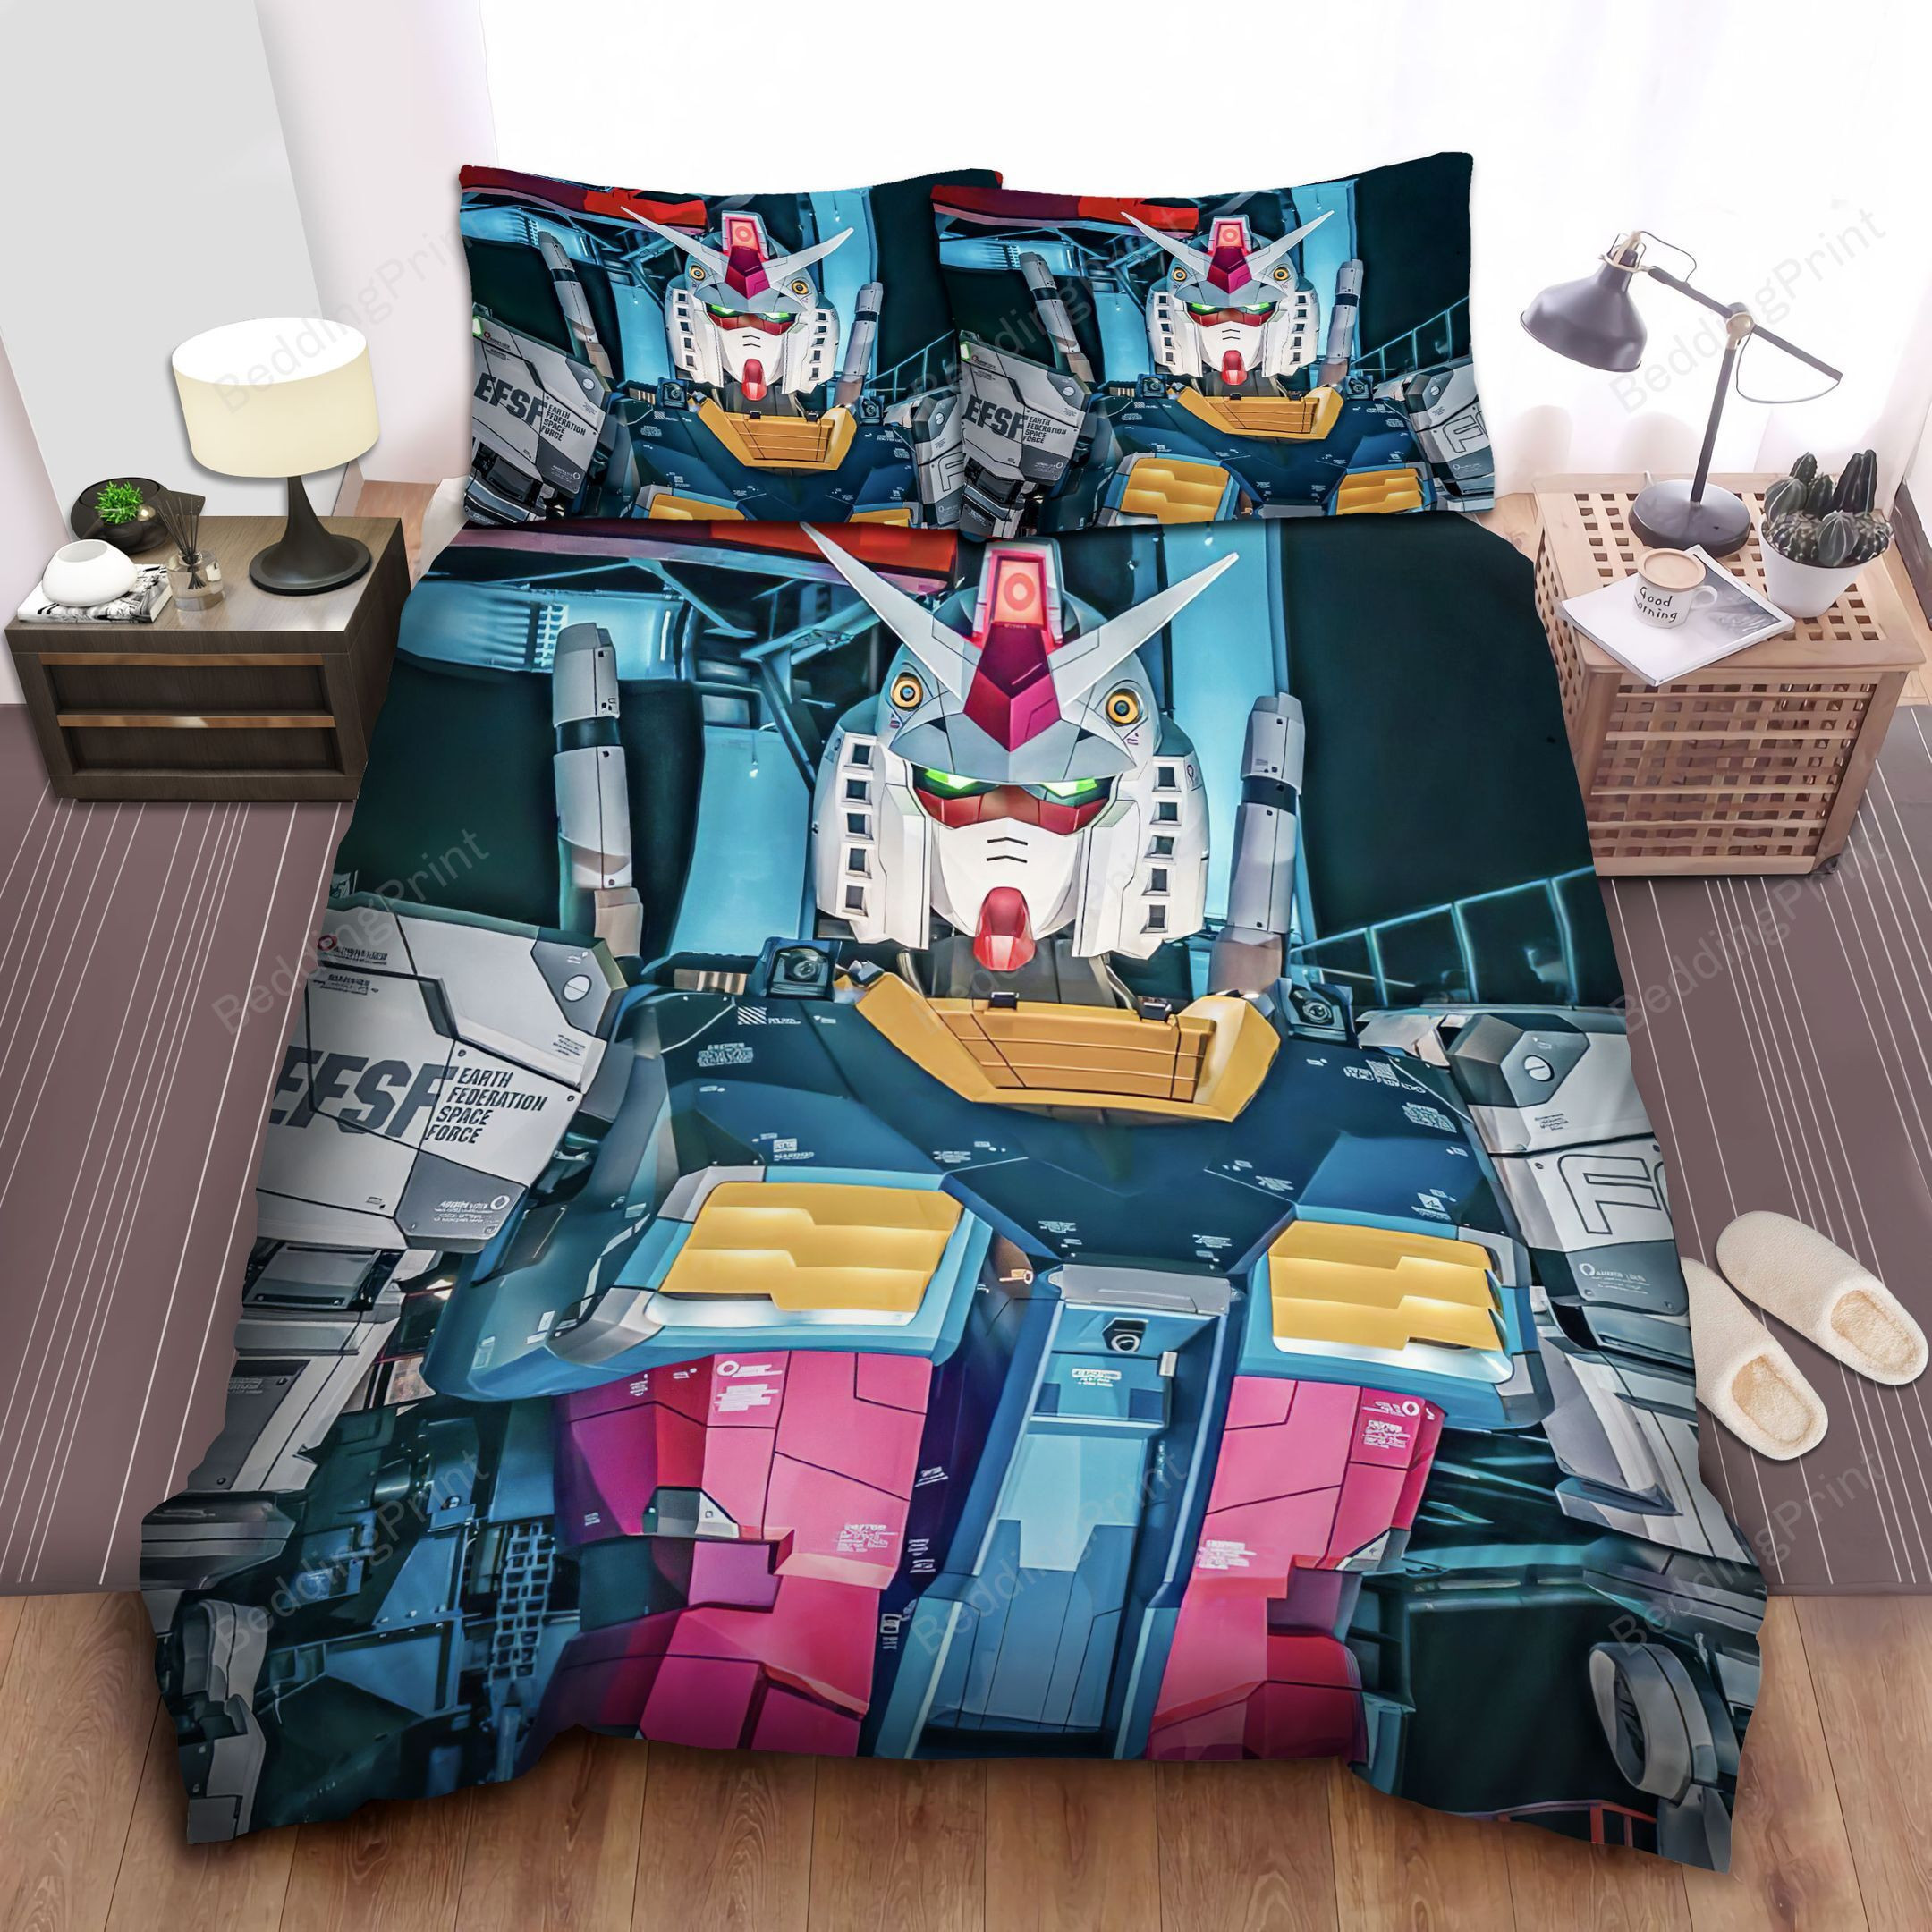 Gundam Robot Bed Sheets Duvet Cover Bedding Sets Please Note This Is A Duvet Cover Not A 4887